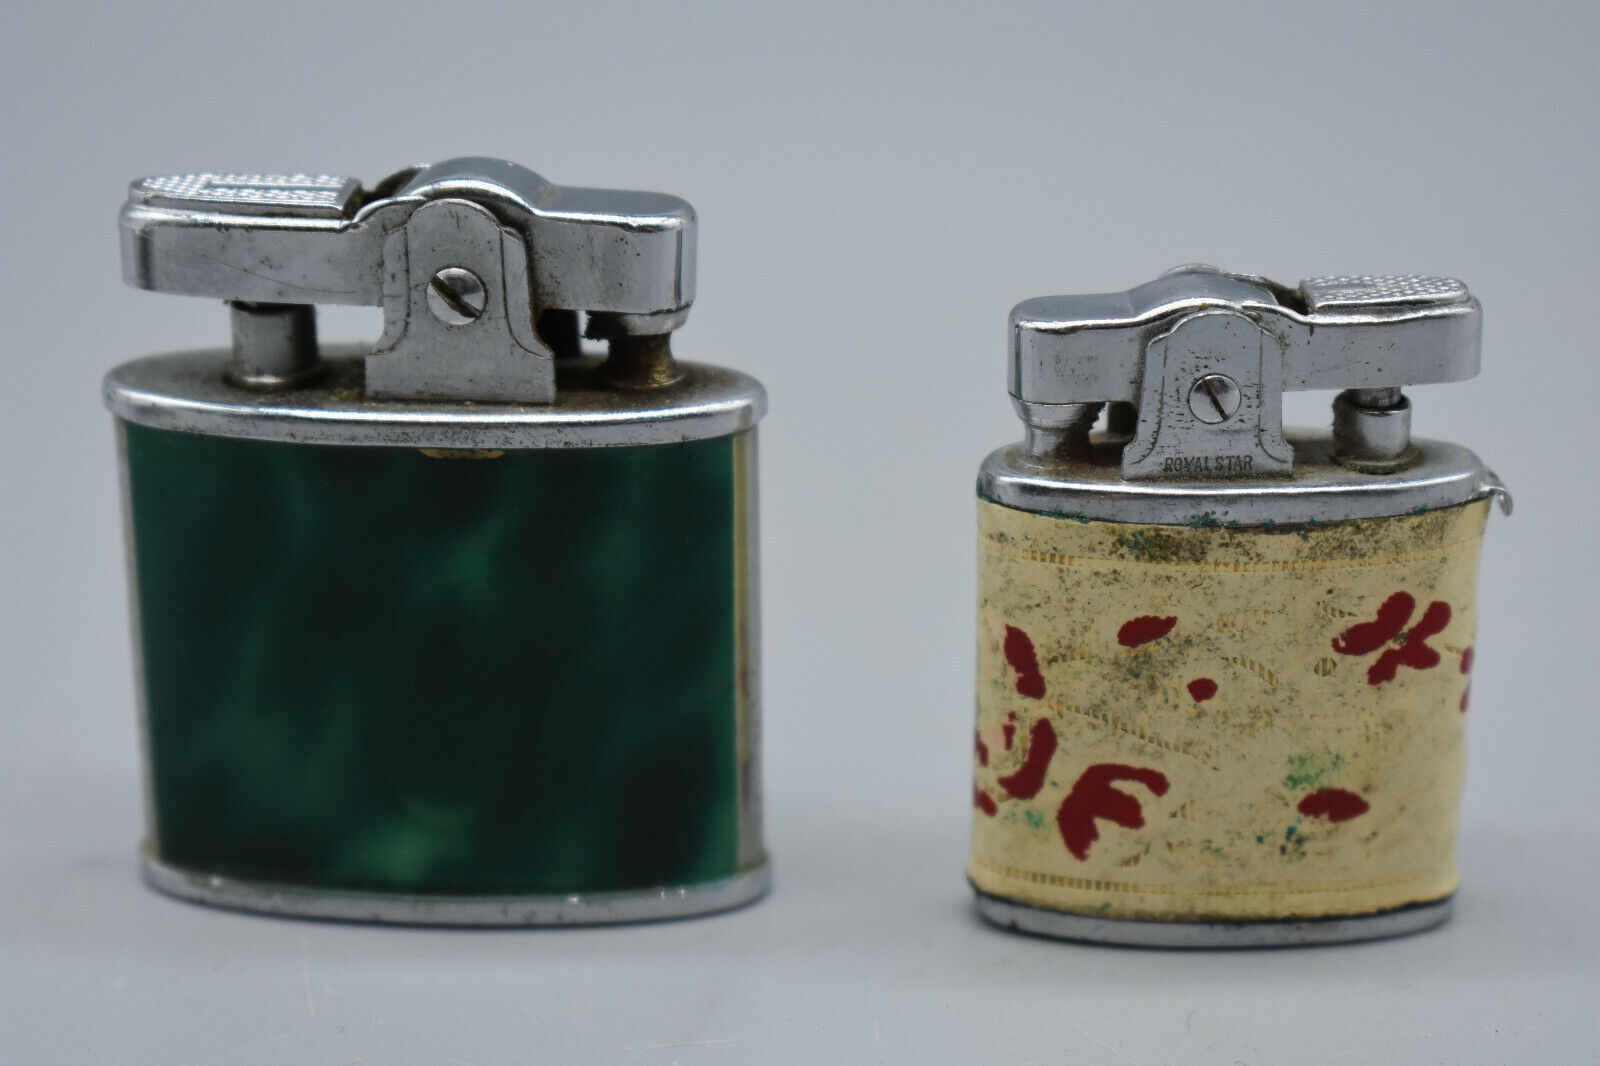 Two Royal Star Cigarette Lighters. -Both Preowned & in Good Condition, untested